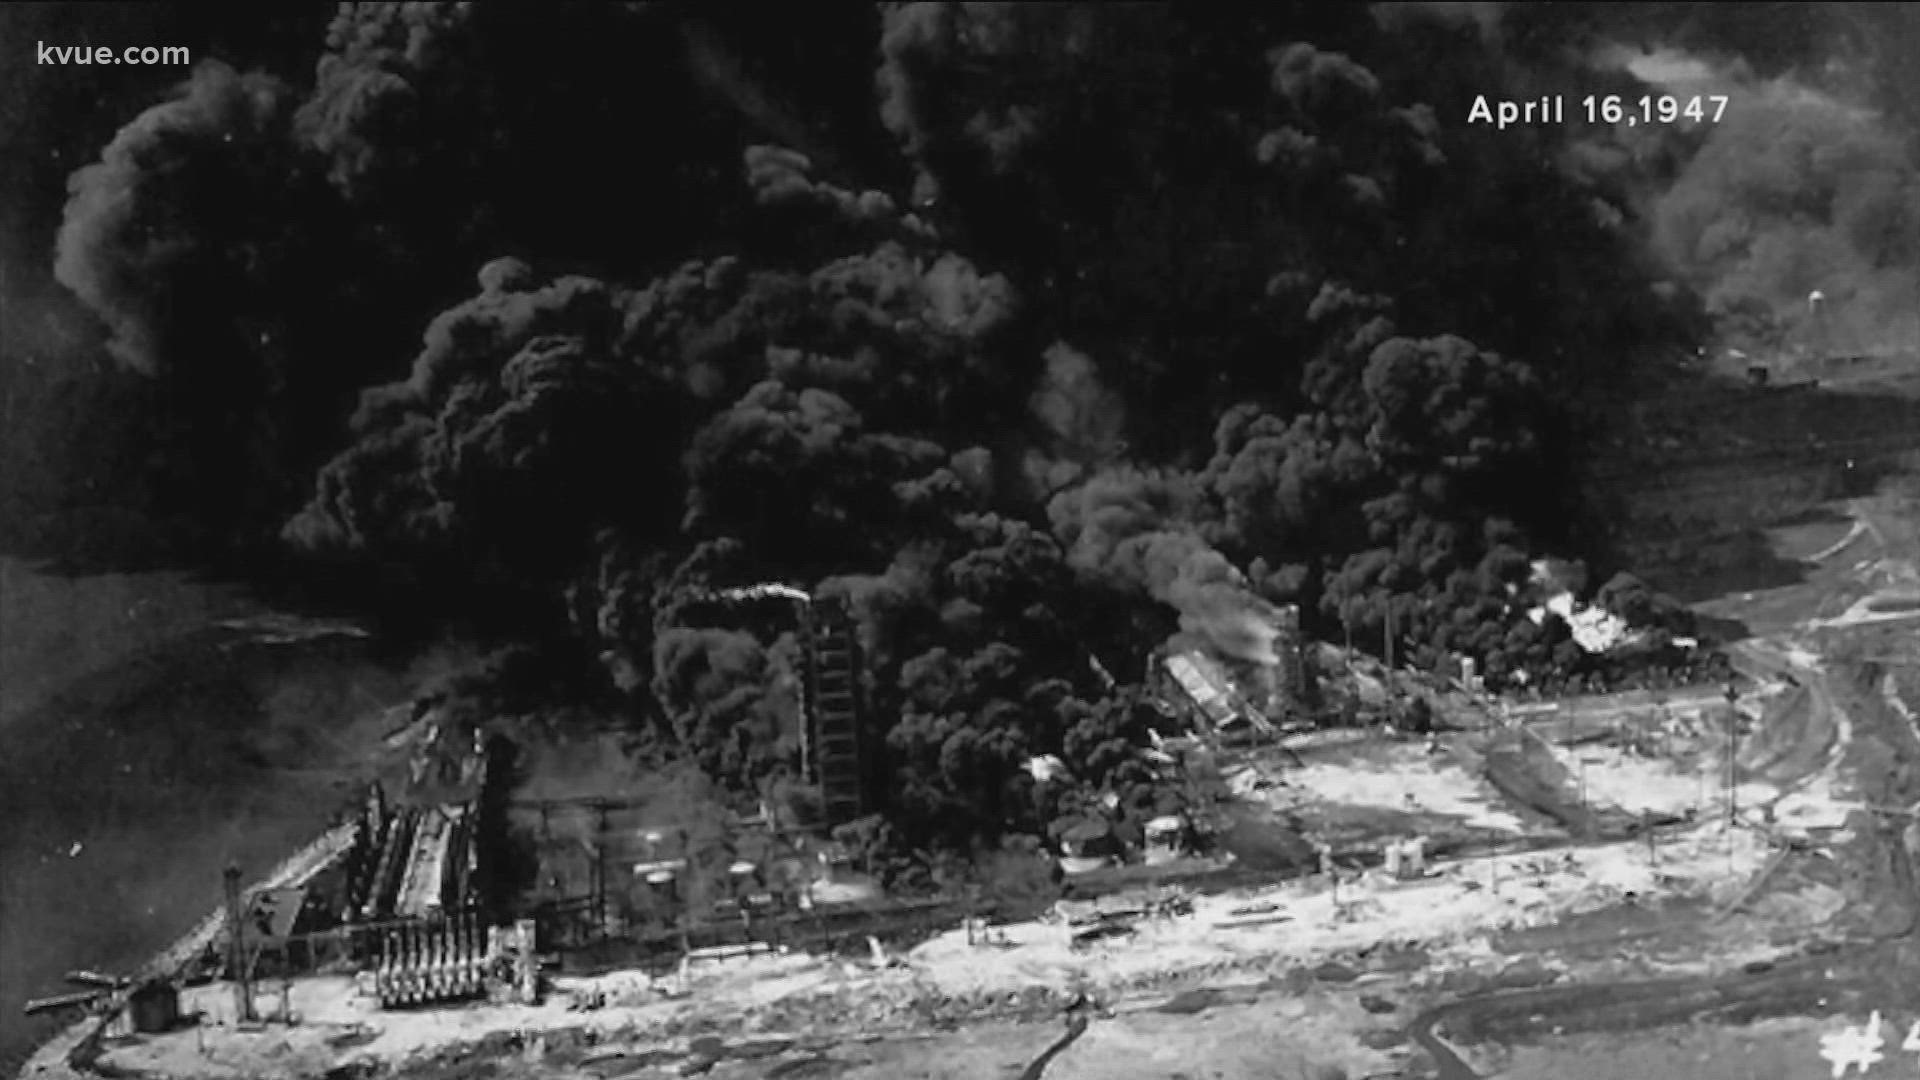 It’s believed that as many as 600 people died when ships anchored at the docks in Texas City, Texas exploded 75 years ago this week.